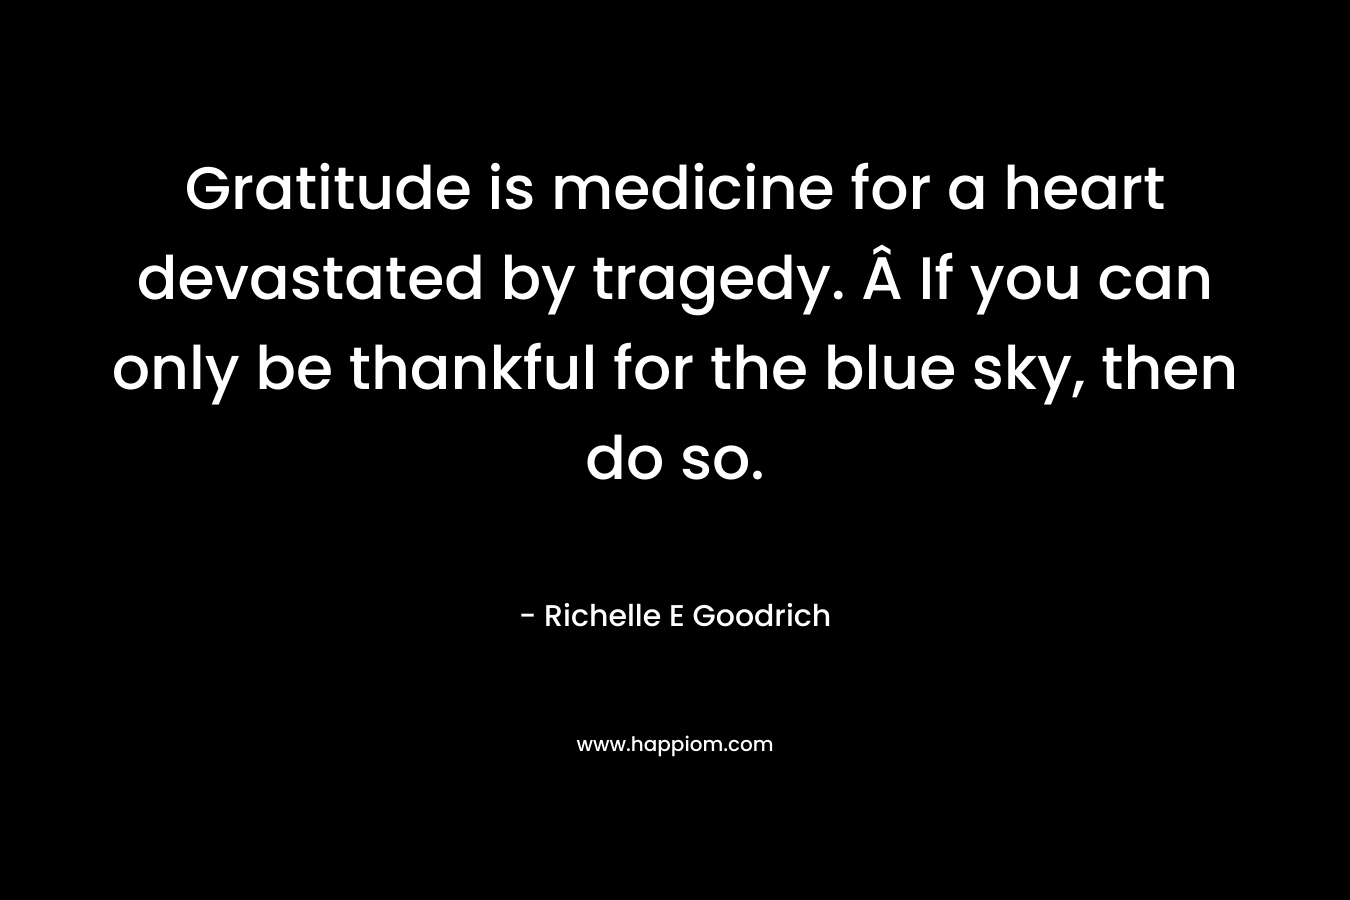 Gratitude is medicine for a heart devastated by tragedy. Â If you can only be thankful for the blue sky, then do so.